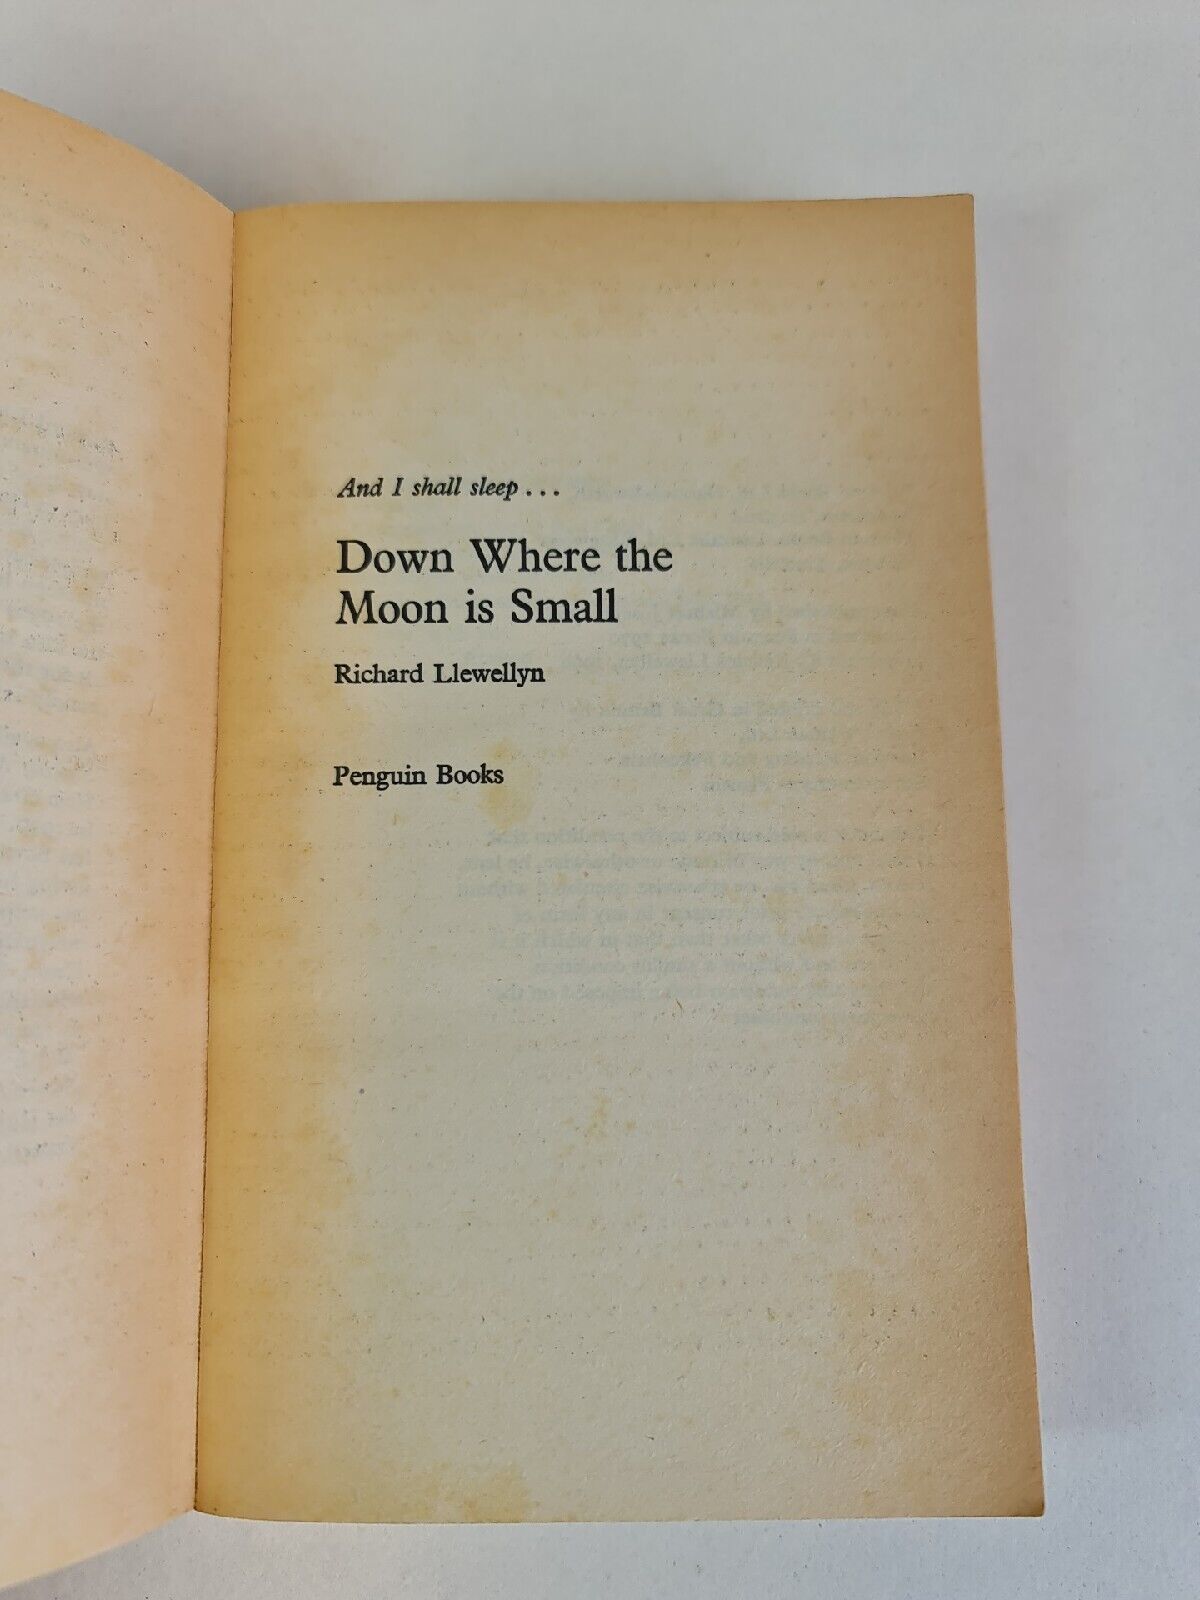 Down Where the Moon is Small by Richard Llewellyn (1970)